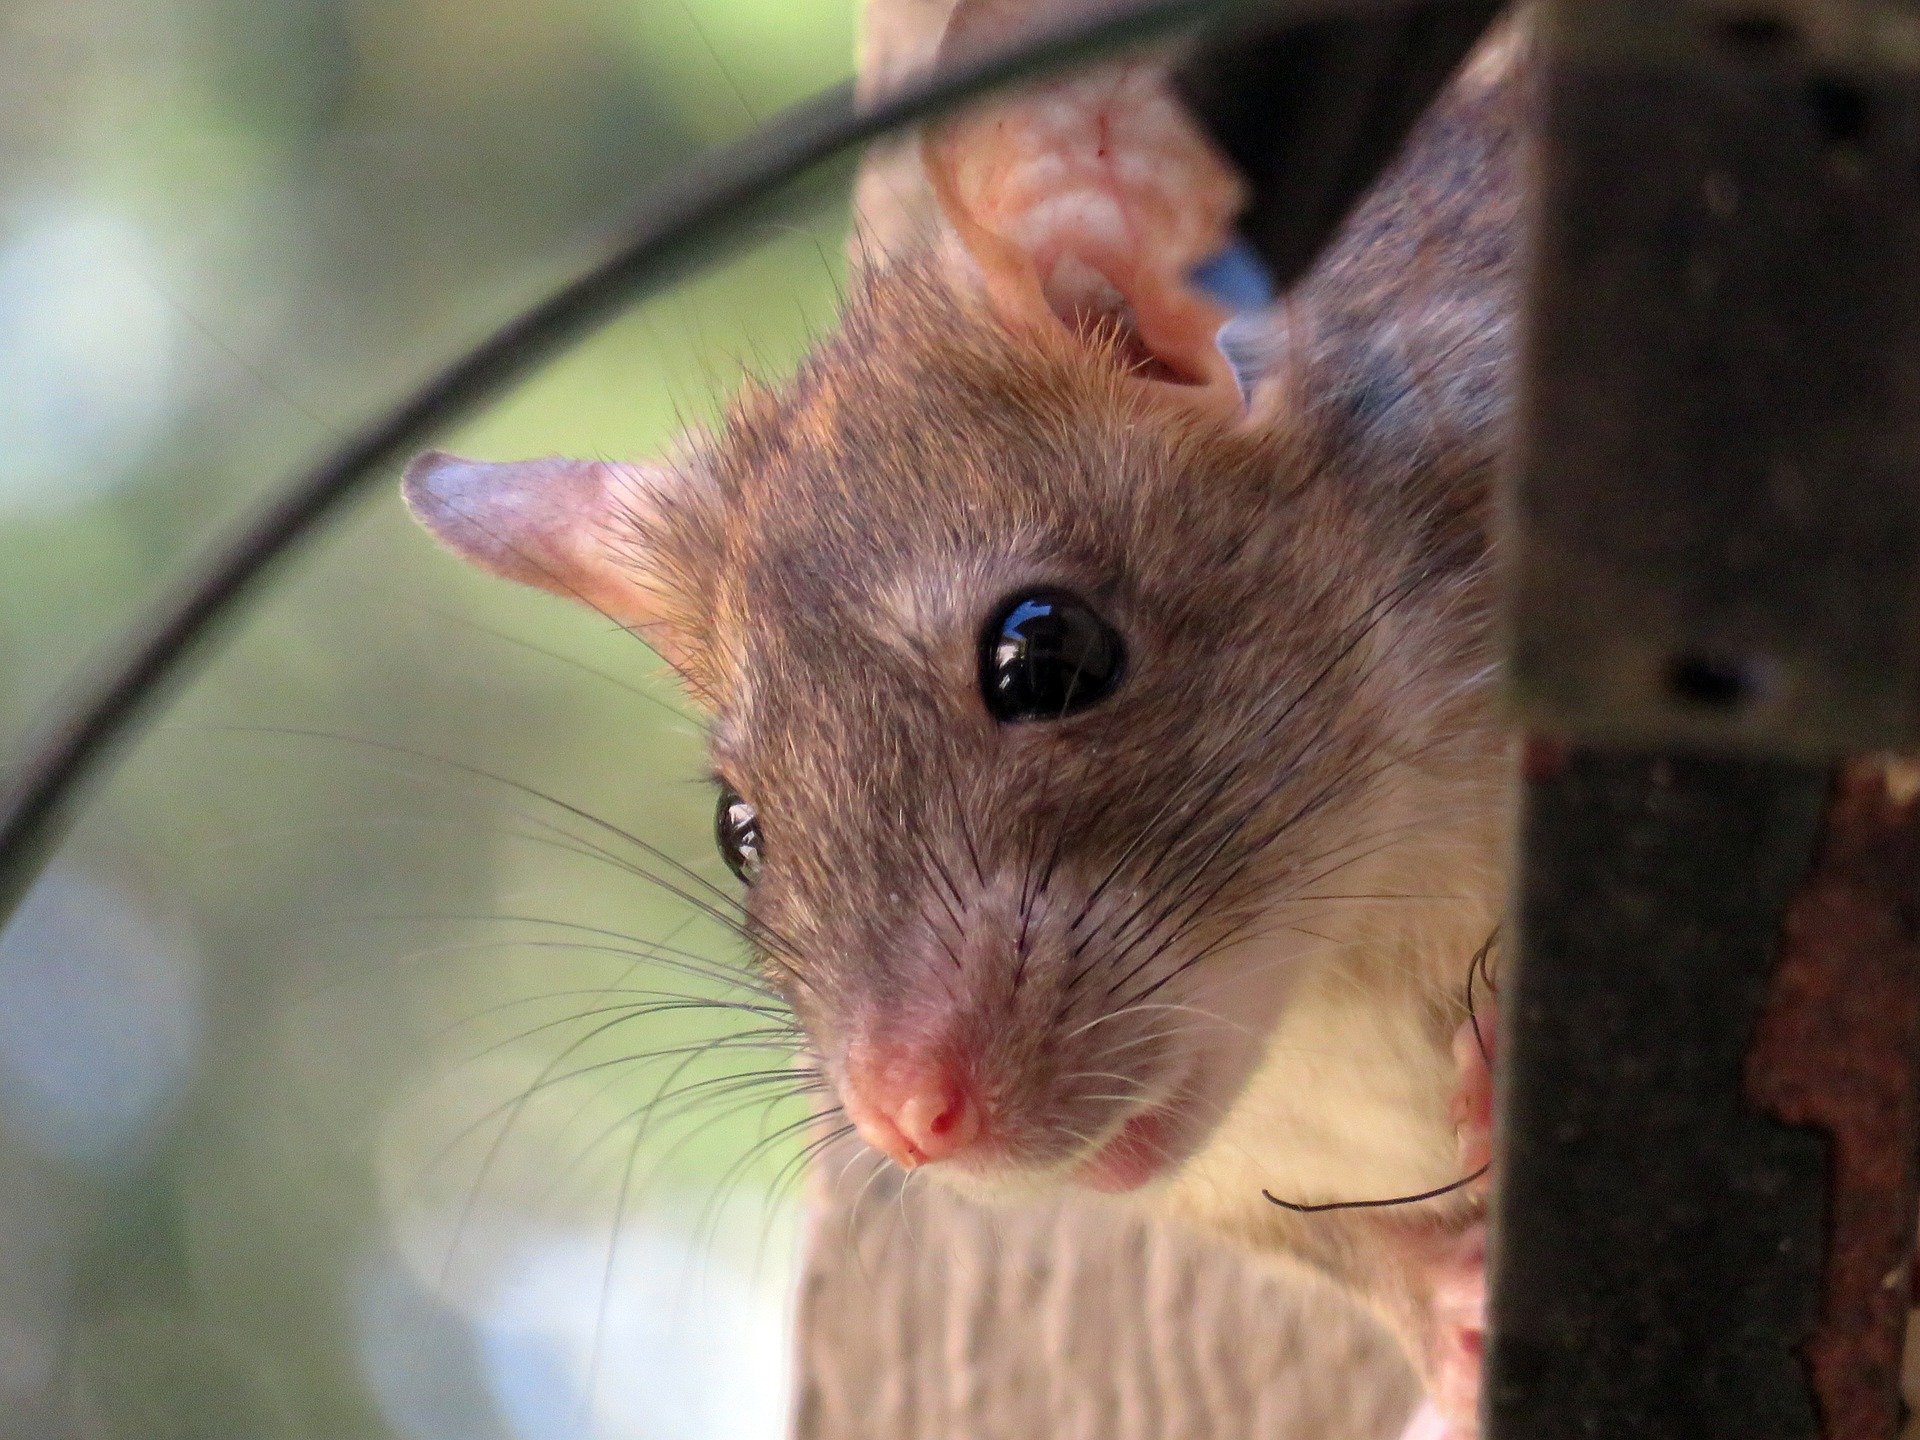 How To Prevent Rats From Entering Your Home